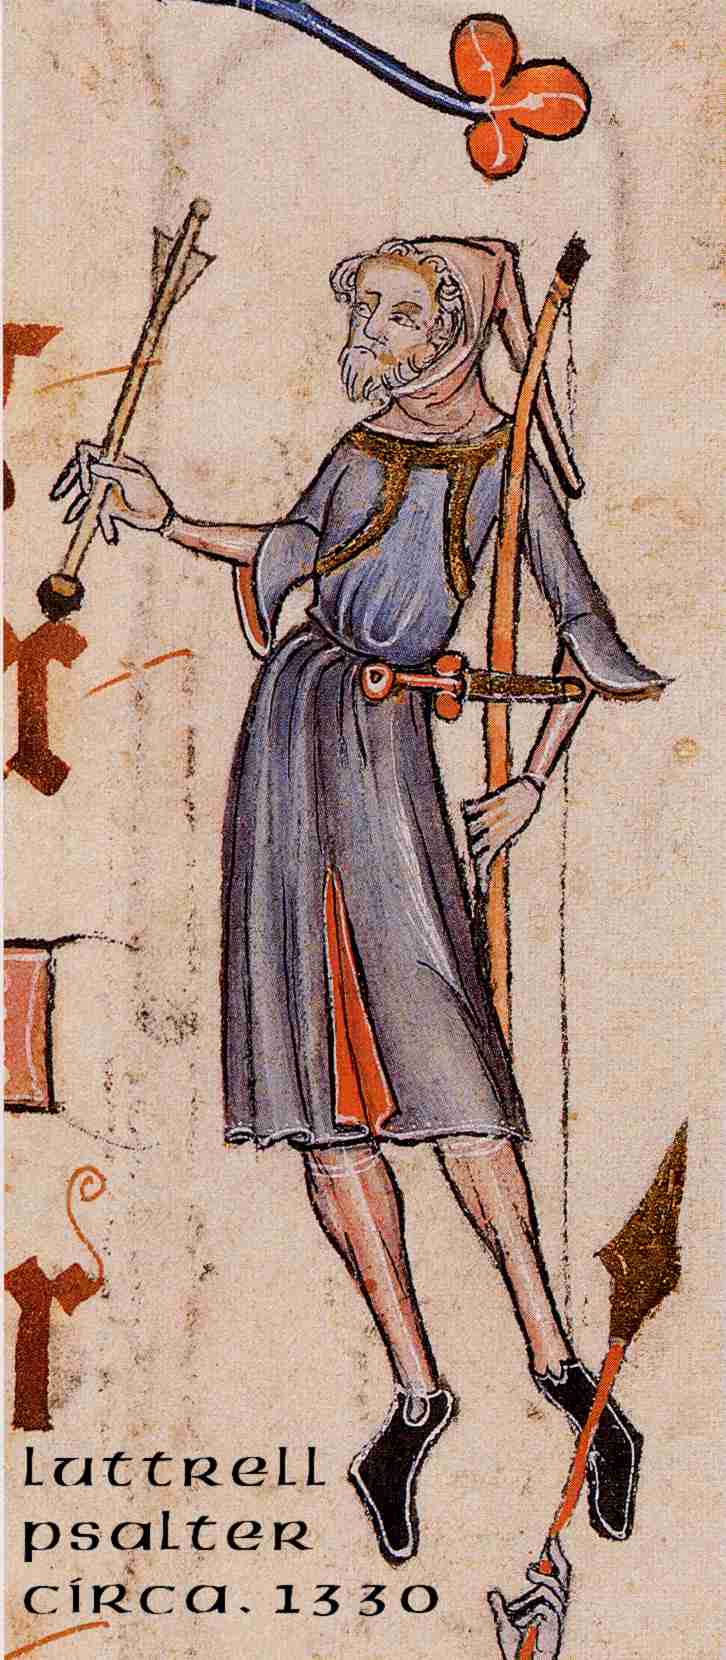 Archer from the Luttrell Psalter, around 1330.